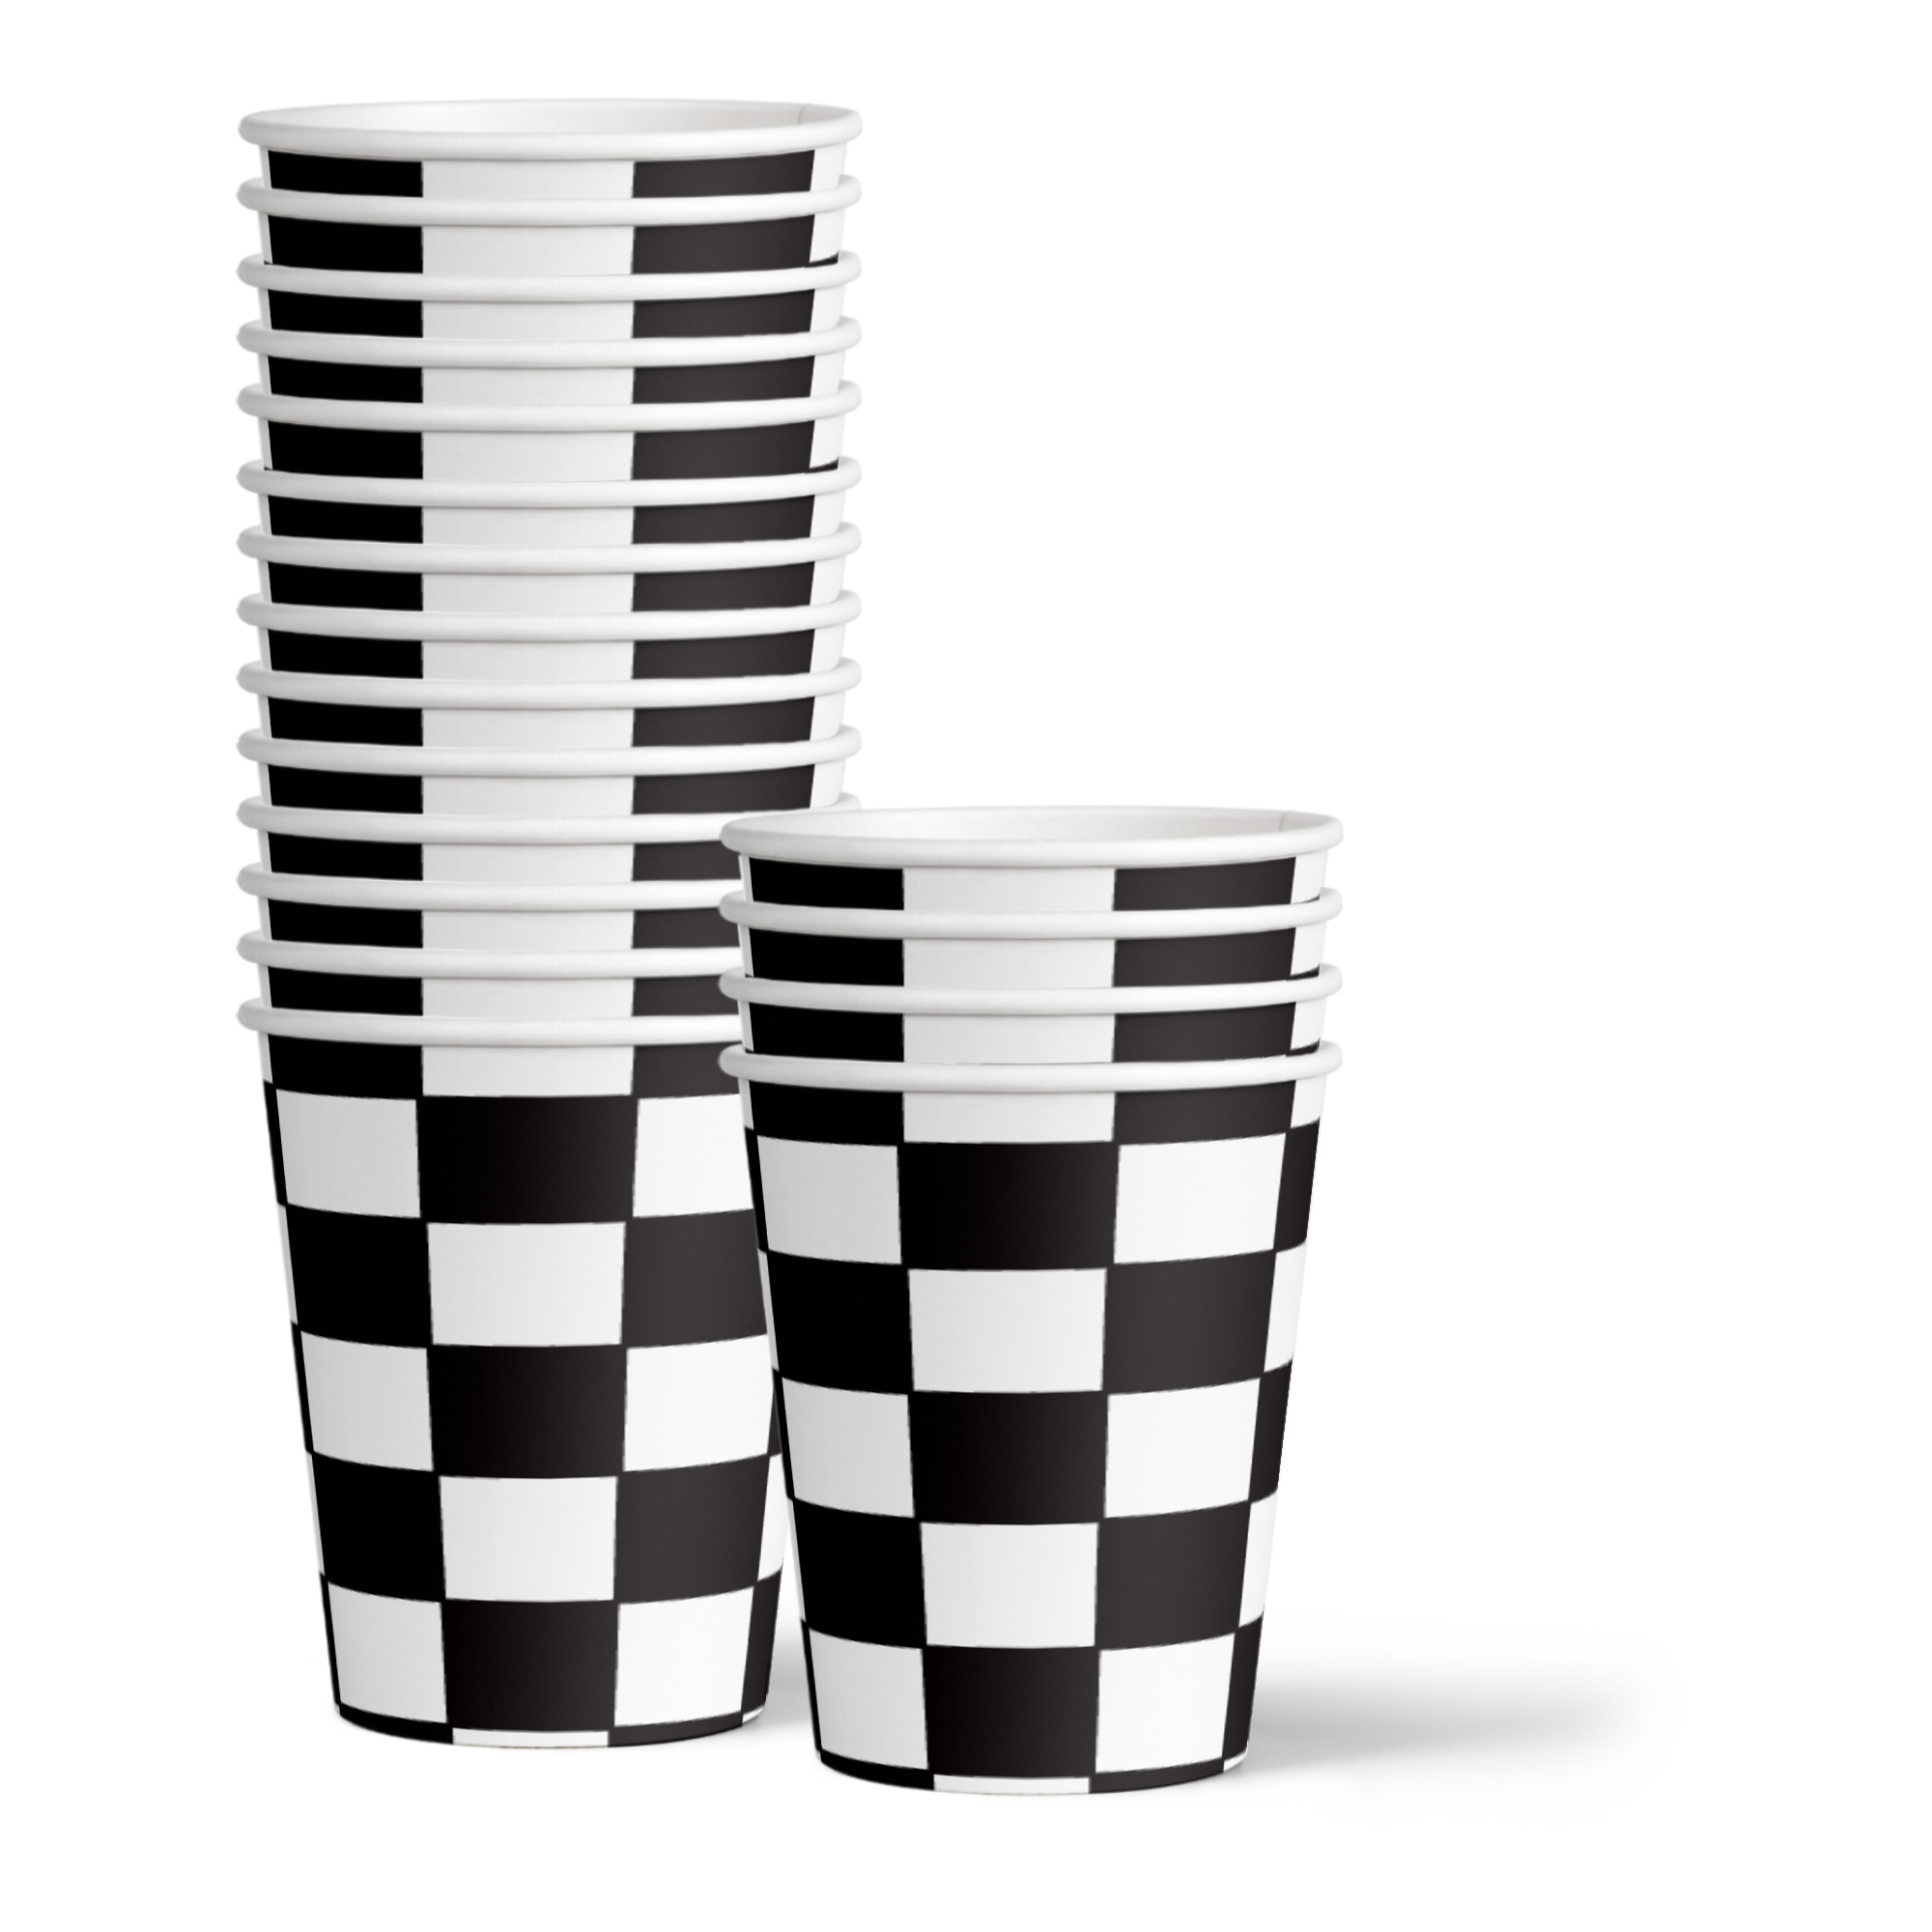 Catch Me I'm Three Checkered Flag Racing 3rd Birthday Party Supplies 64 Piece Tableware Set Includes Large 9" Paper Plates Dessert Plates, Cups and Napkins Kit for 16